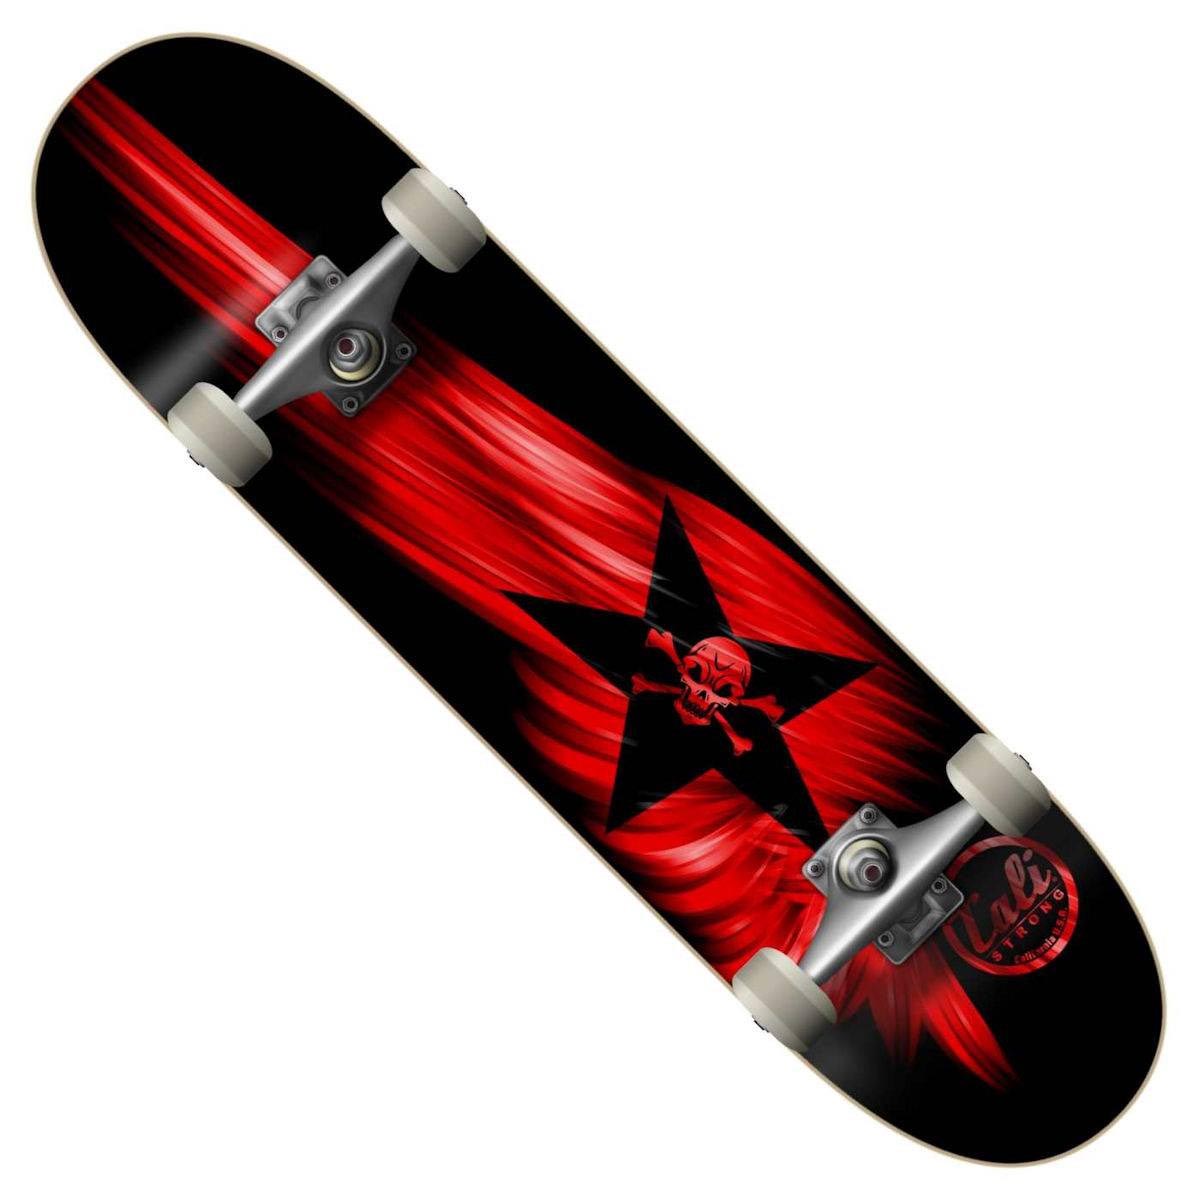 CALI Strong Red Wing Skateboard Trick Complete - Trick Skateboard - Image 1 - CALI Strong